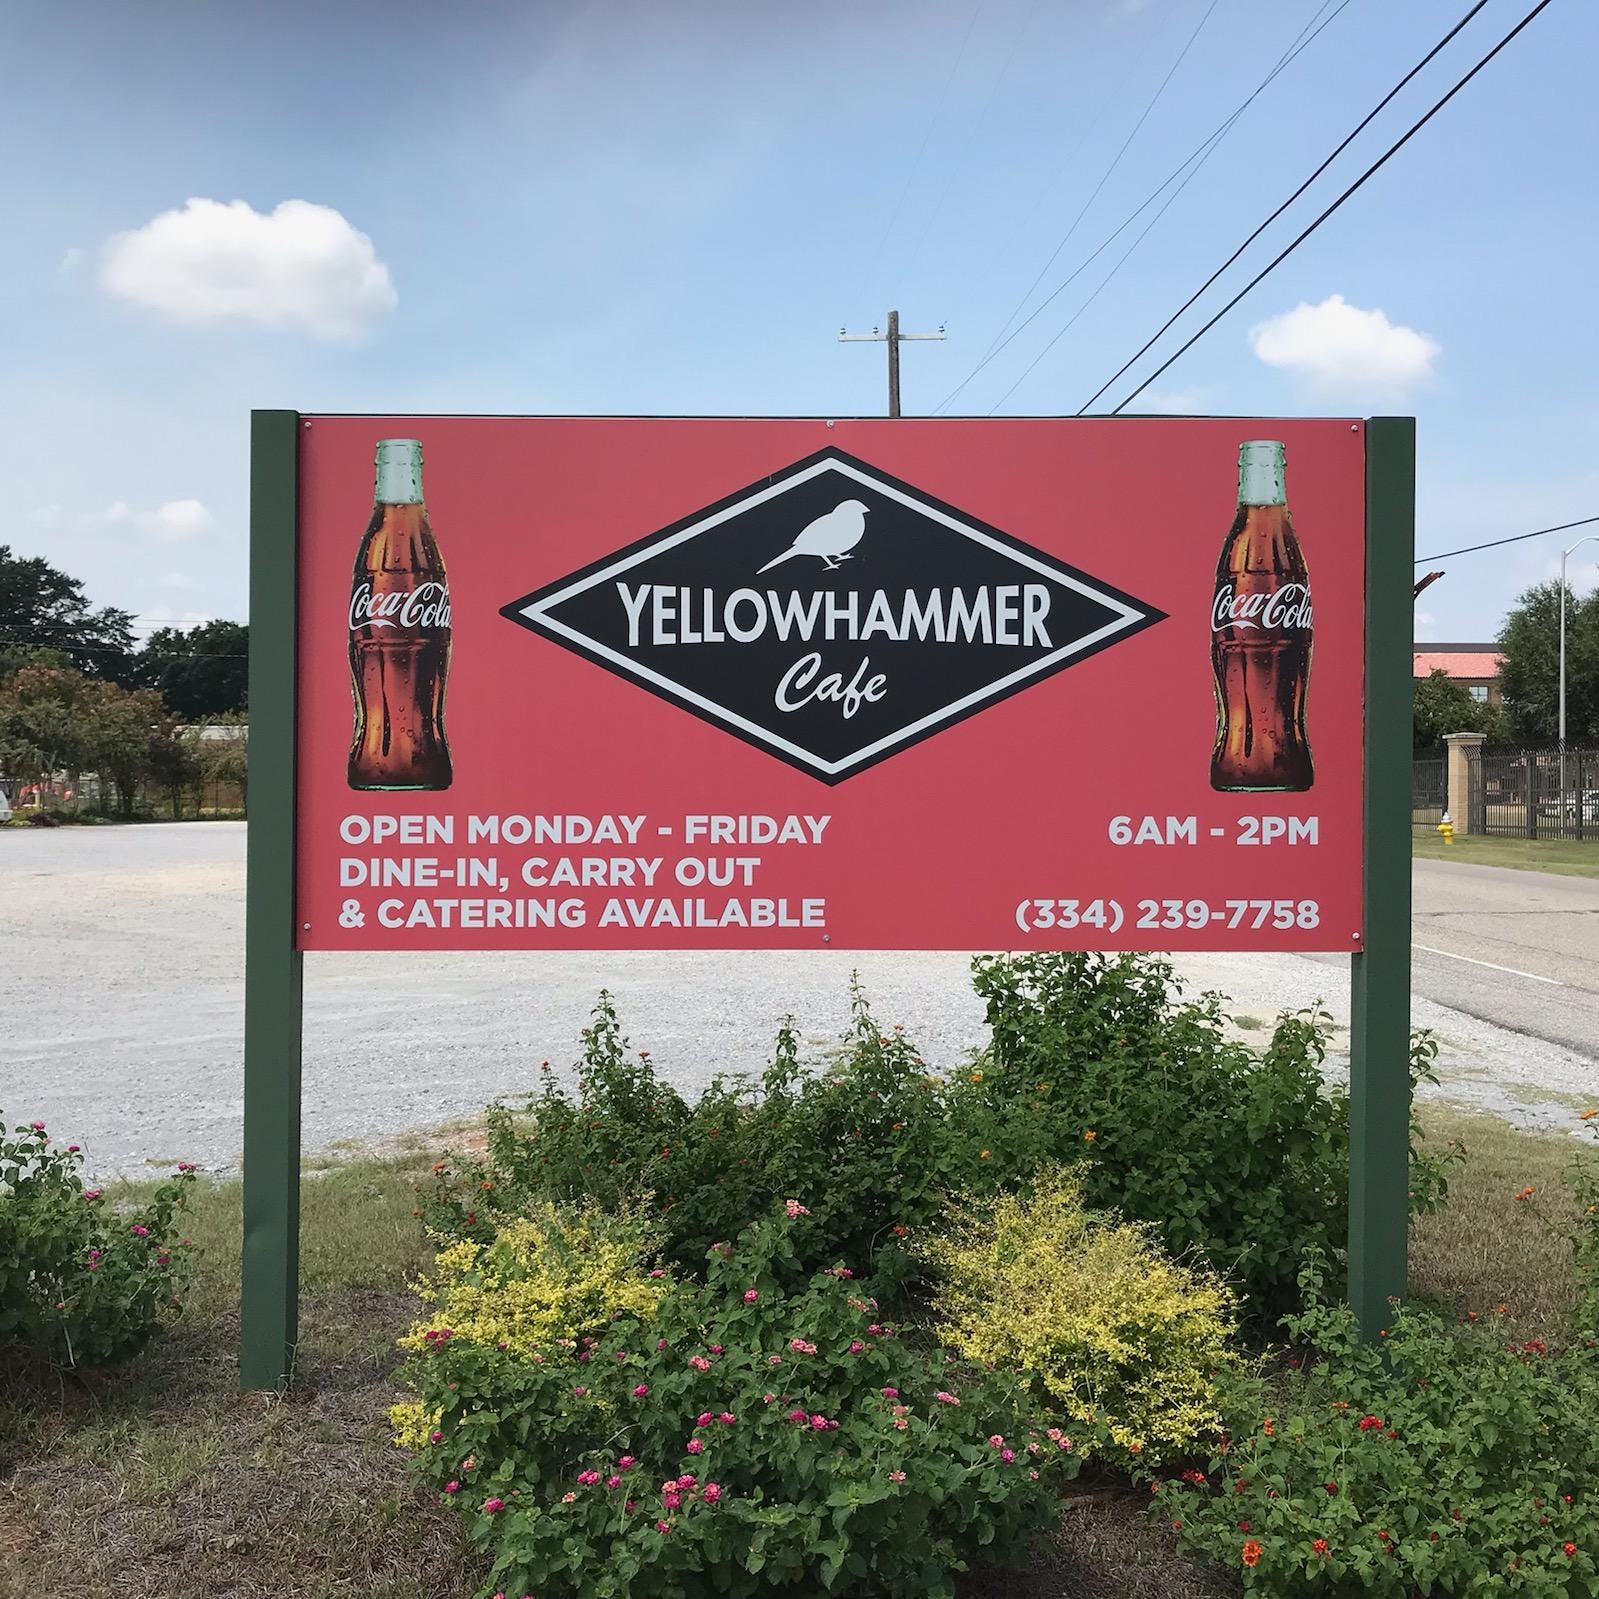 City denies Yellowhammer Cafe restaurant the right to operate